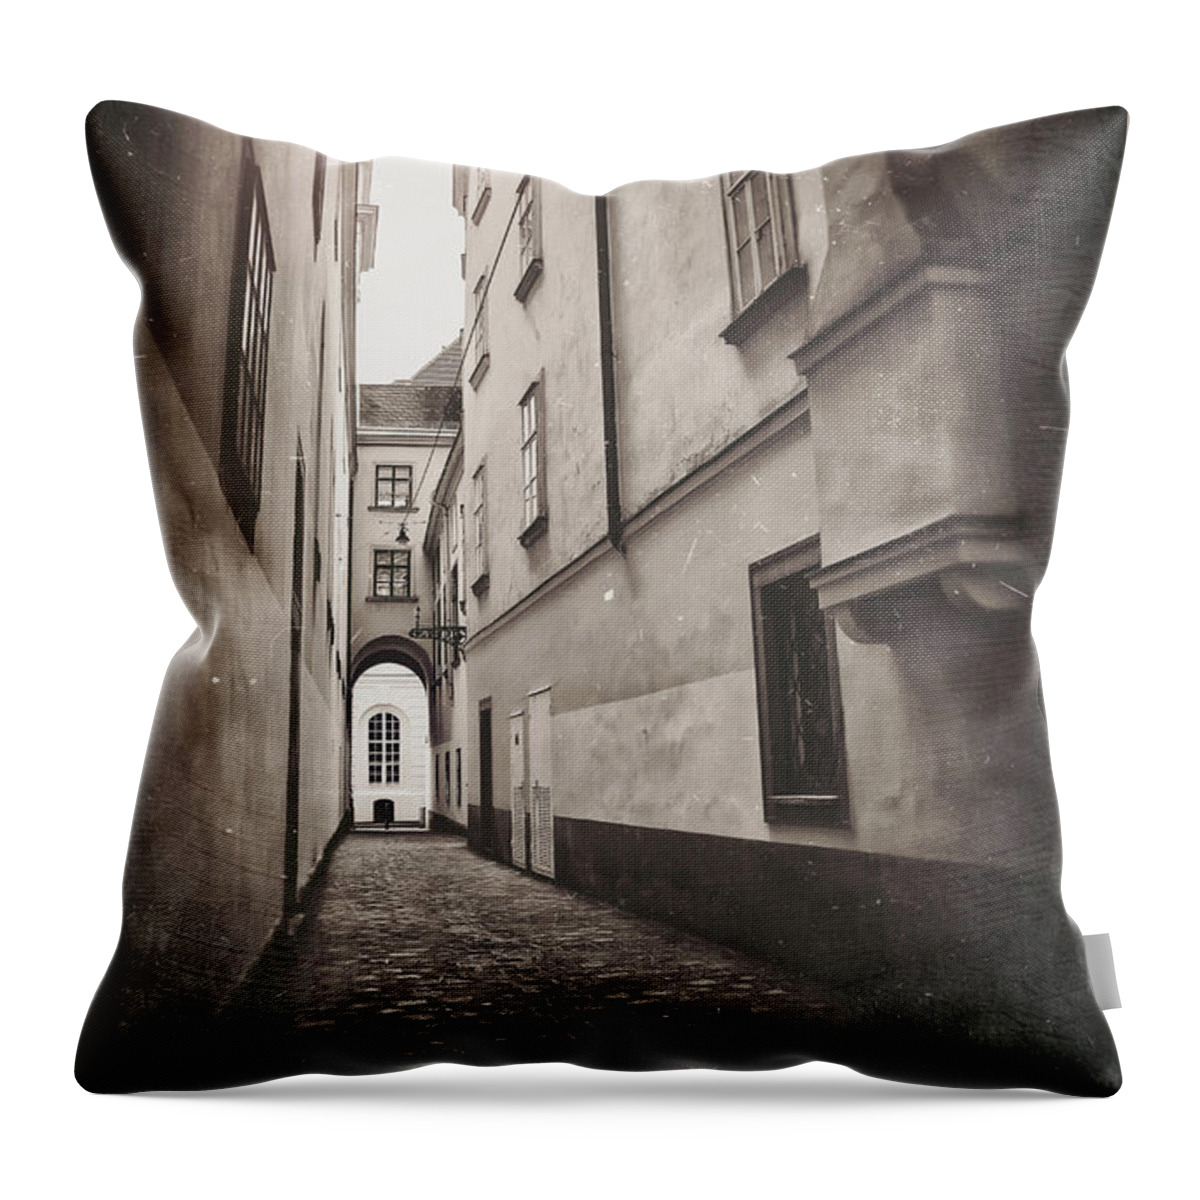 Vienna Throw Pillow featuring the photograph Historic Cobblestone Streets of Old Vienna Austria Vintage Sepia by Carol Japp